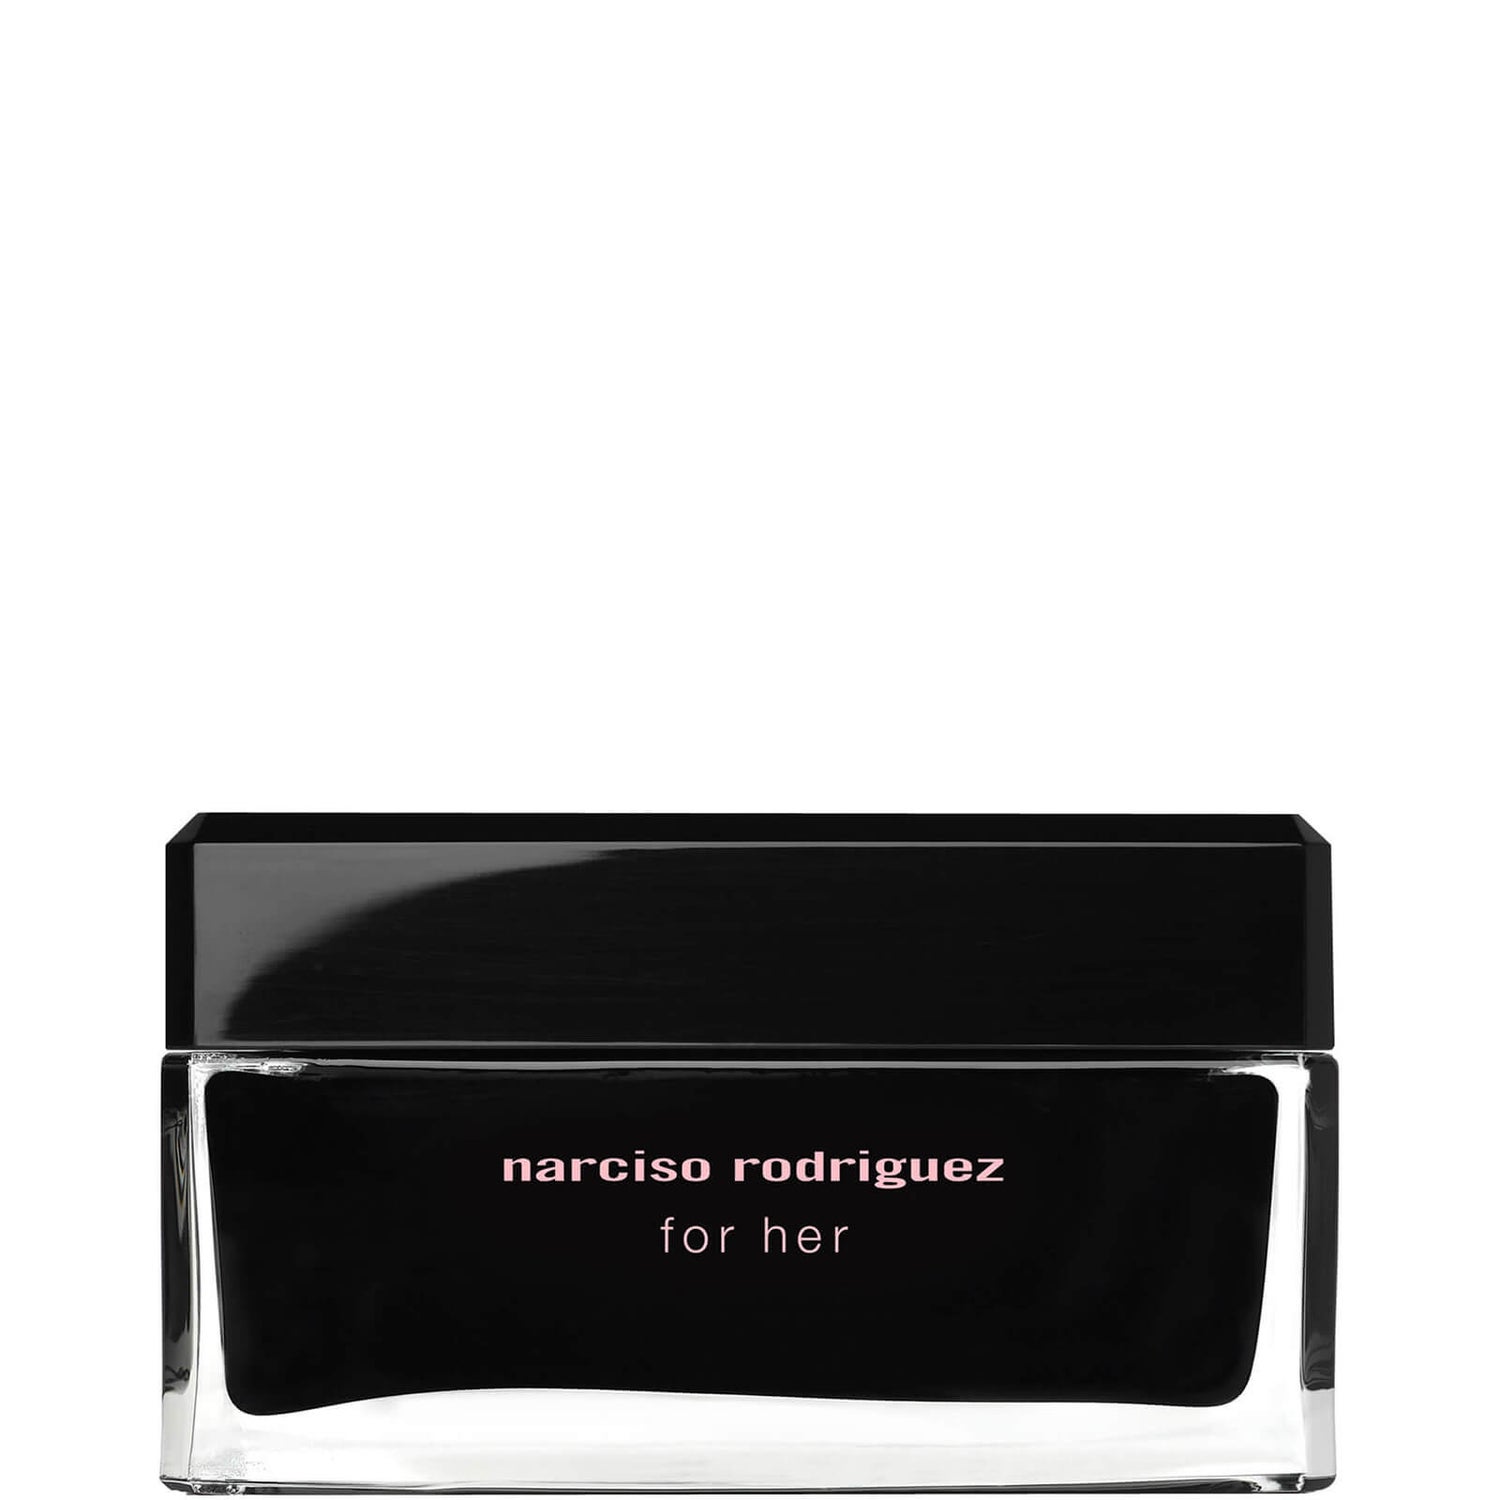 Narciso Rodriguez For Her Body Cream 150ml - LOOKFANTASTIC